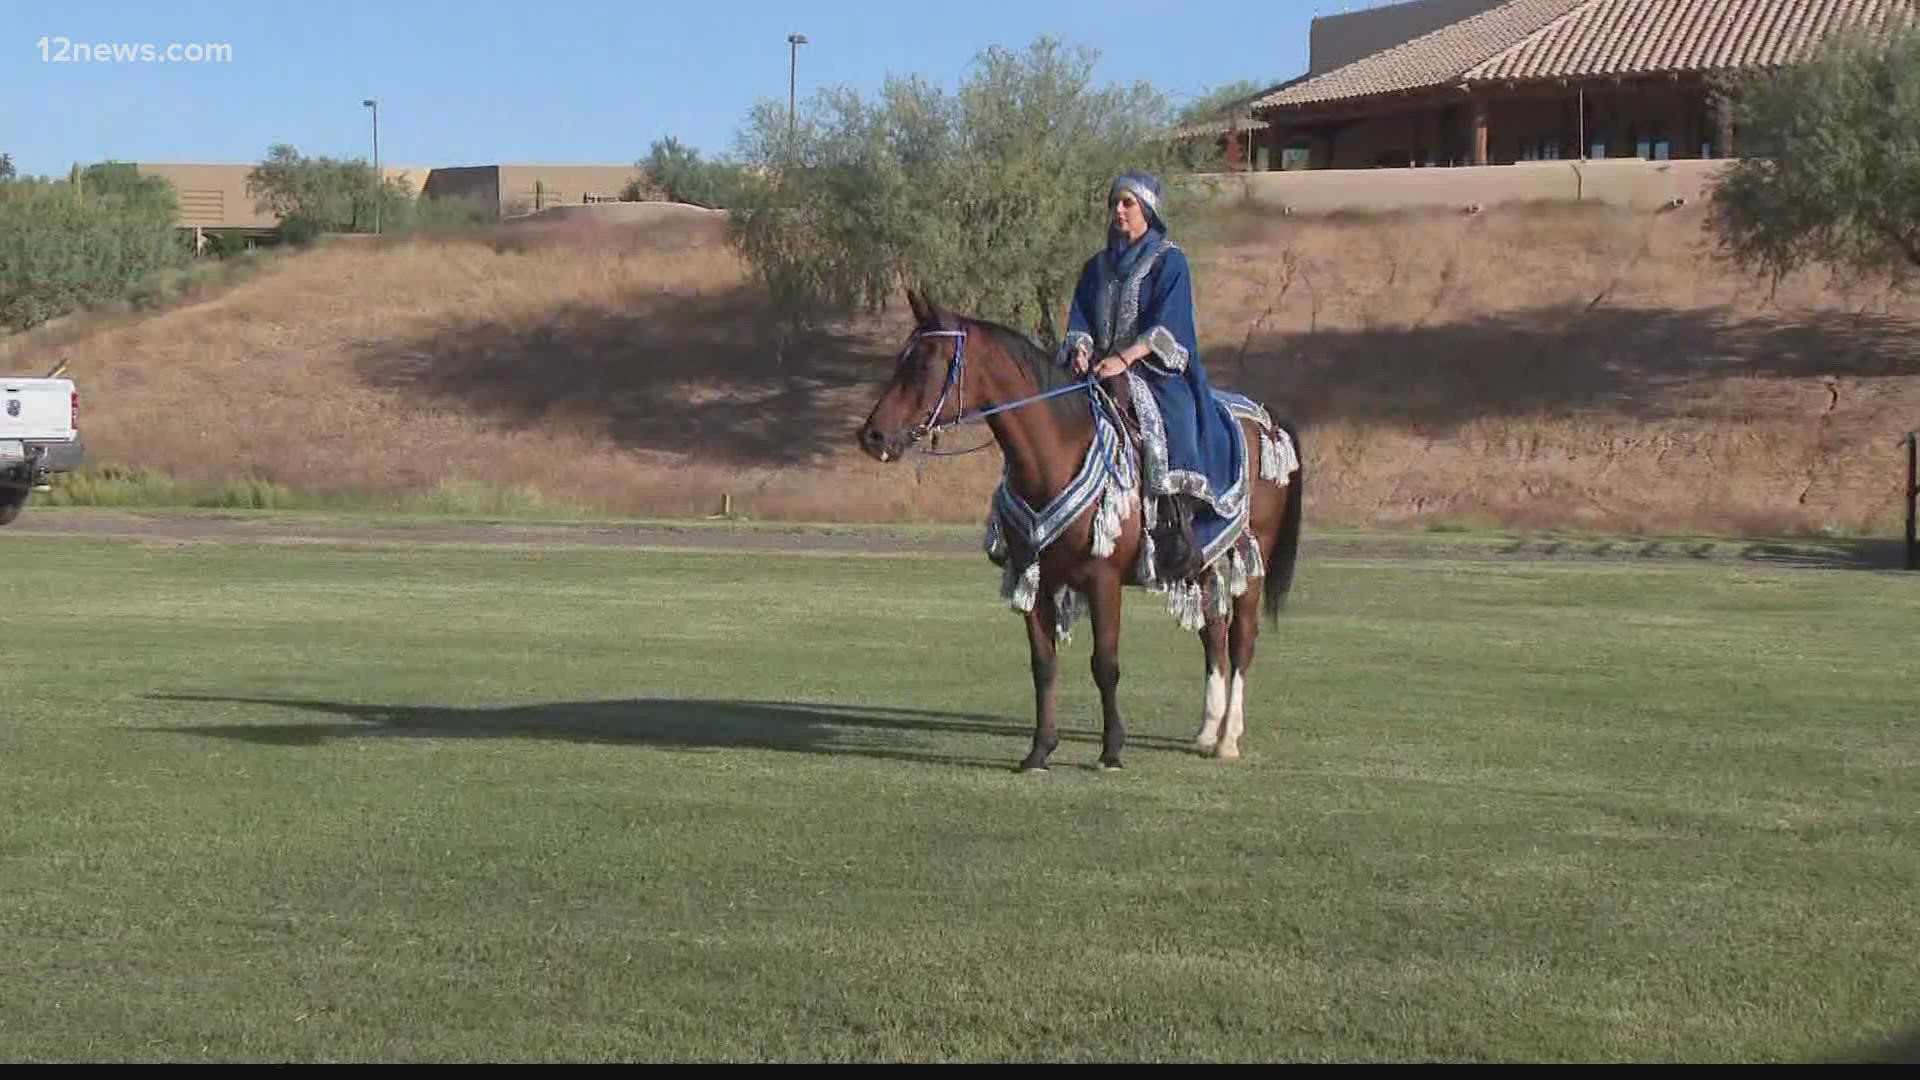 Thousands are expected at the polo championships at Westworld of Scottsdale Saturday. The event will feature fashion shows for humans and dogs, live music and food.